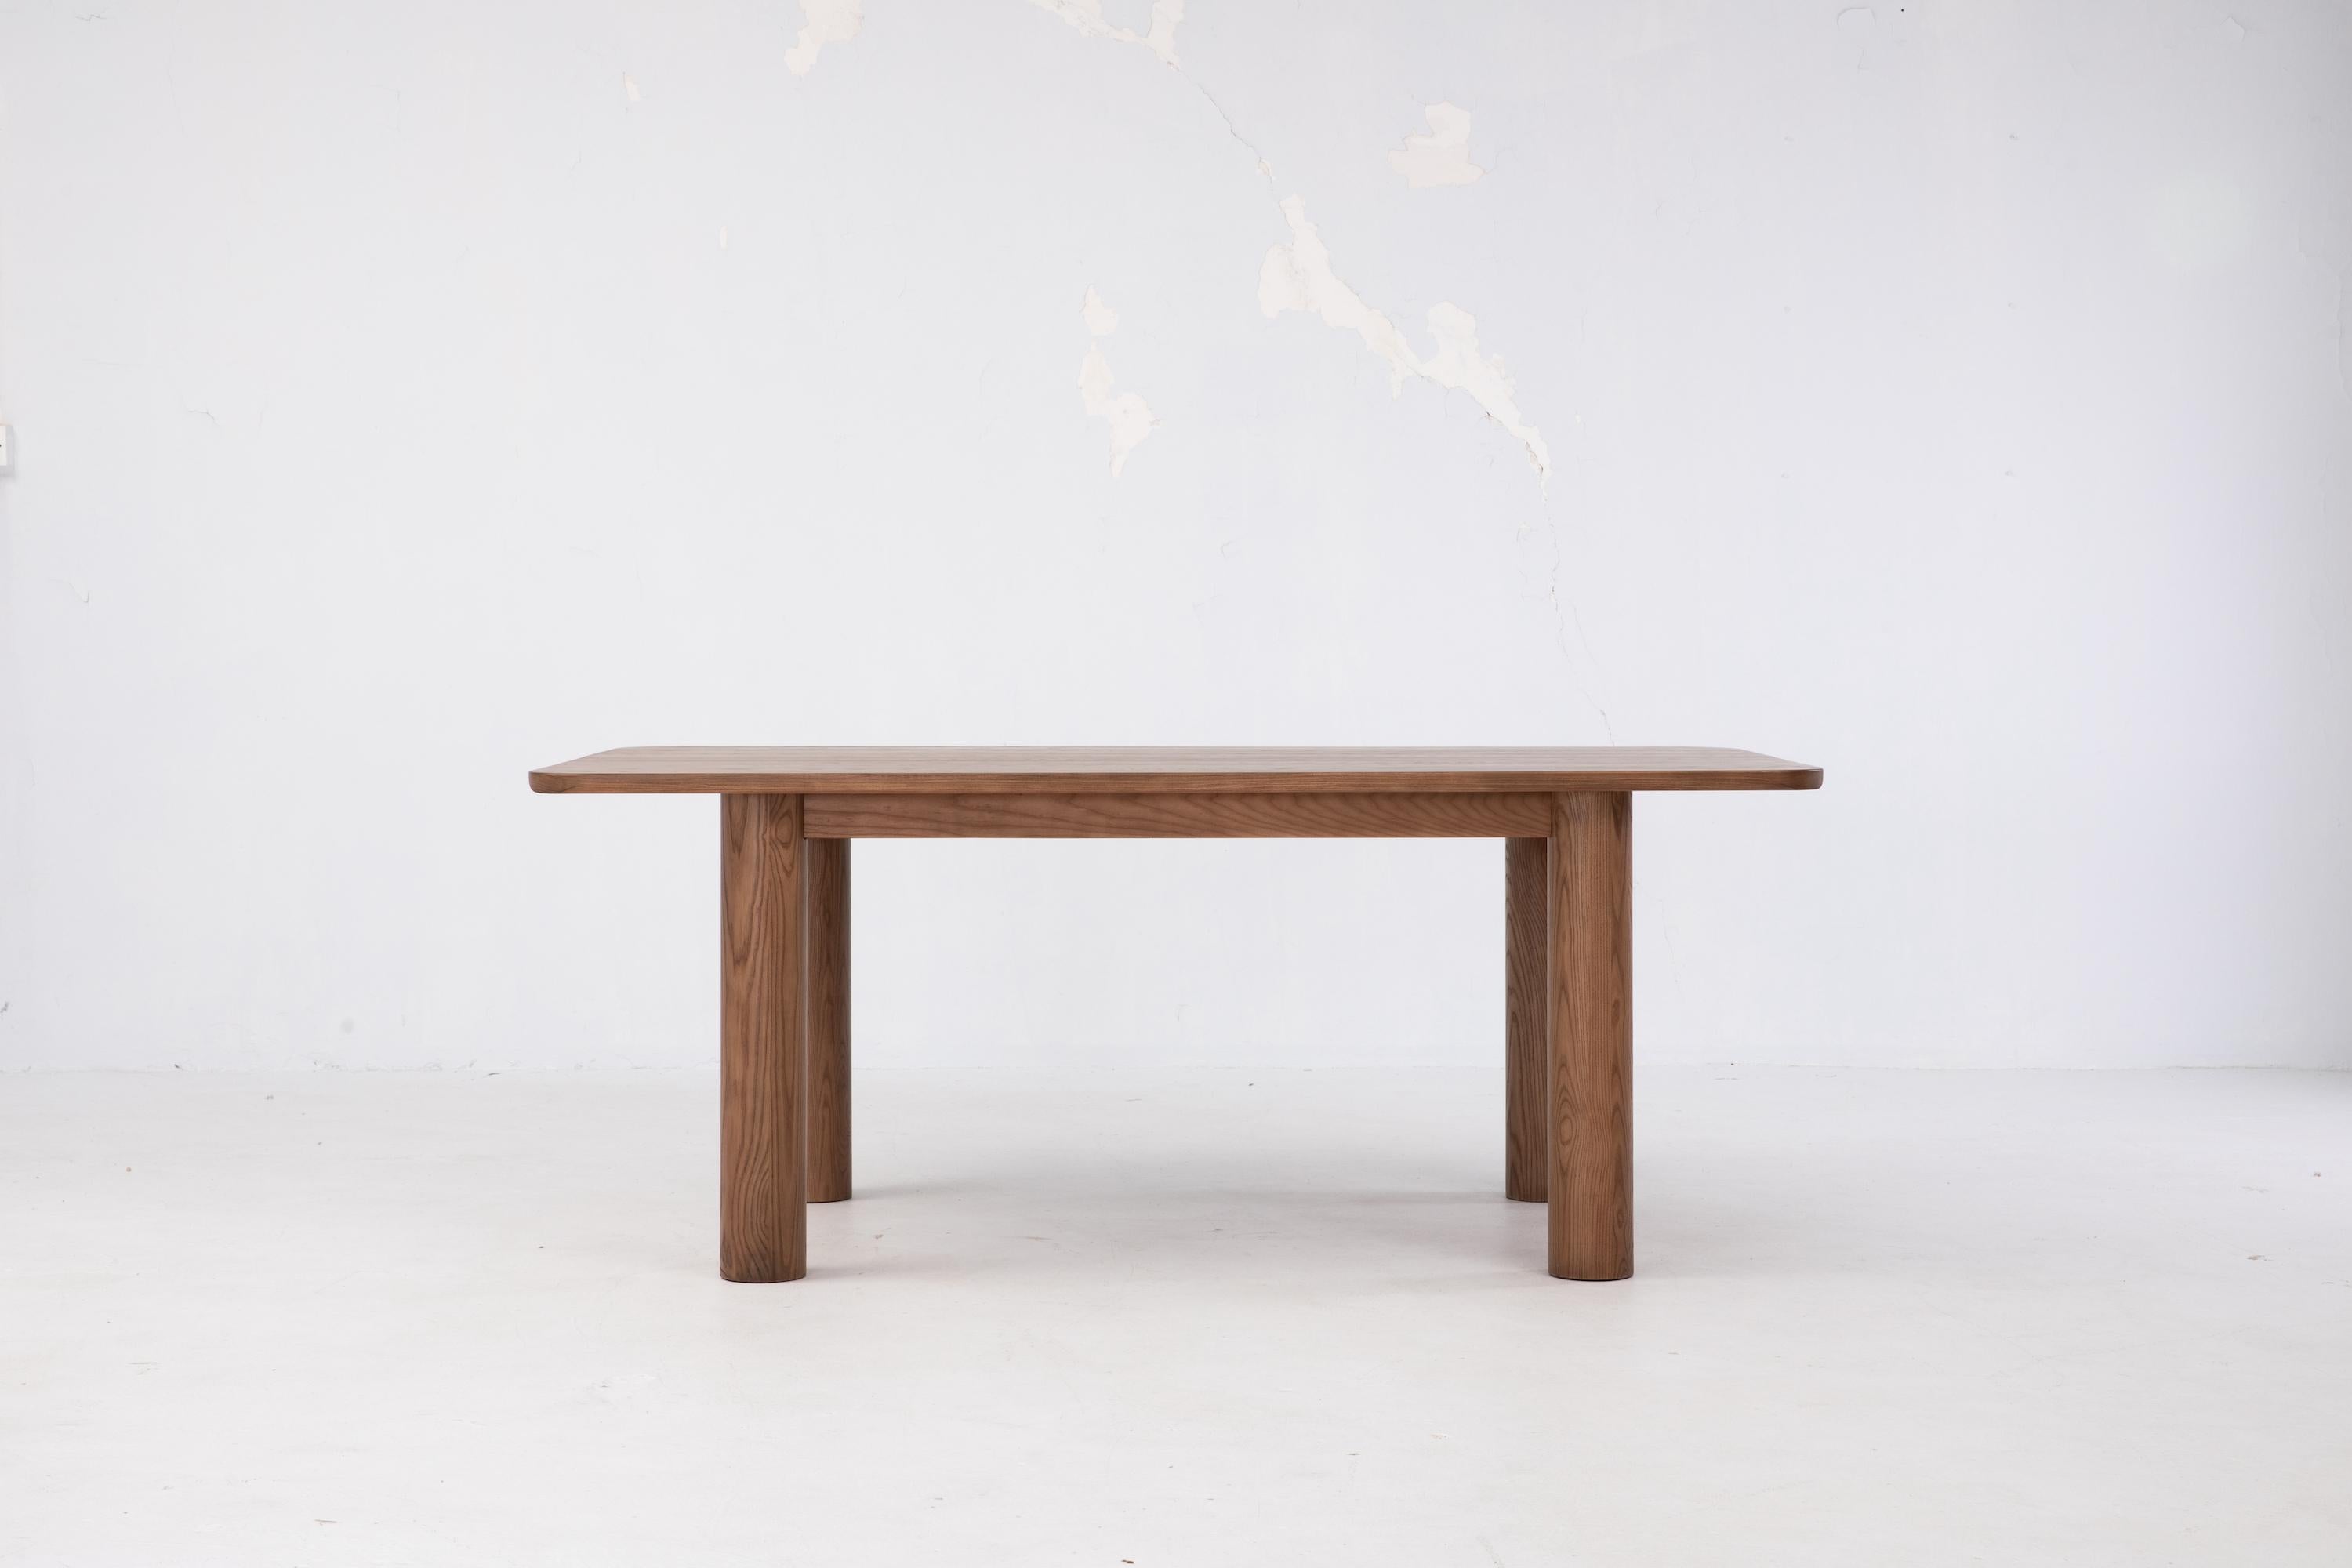 The Arc Dining Table is made from all solid FSC® American White Ash. This centerpiece is meant for life around the dining table and features beautiful corner detailing with wide cylindrical legs. Please note that we make each piece by hand, and